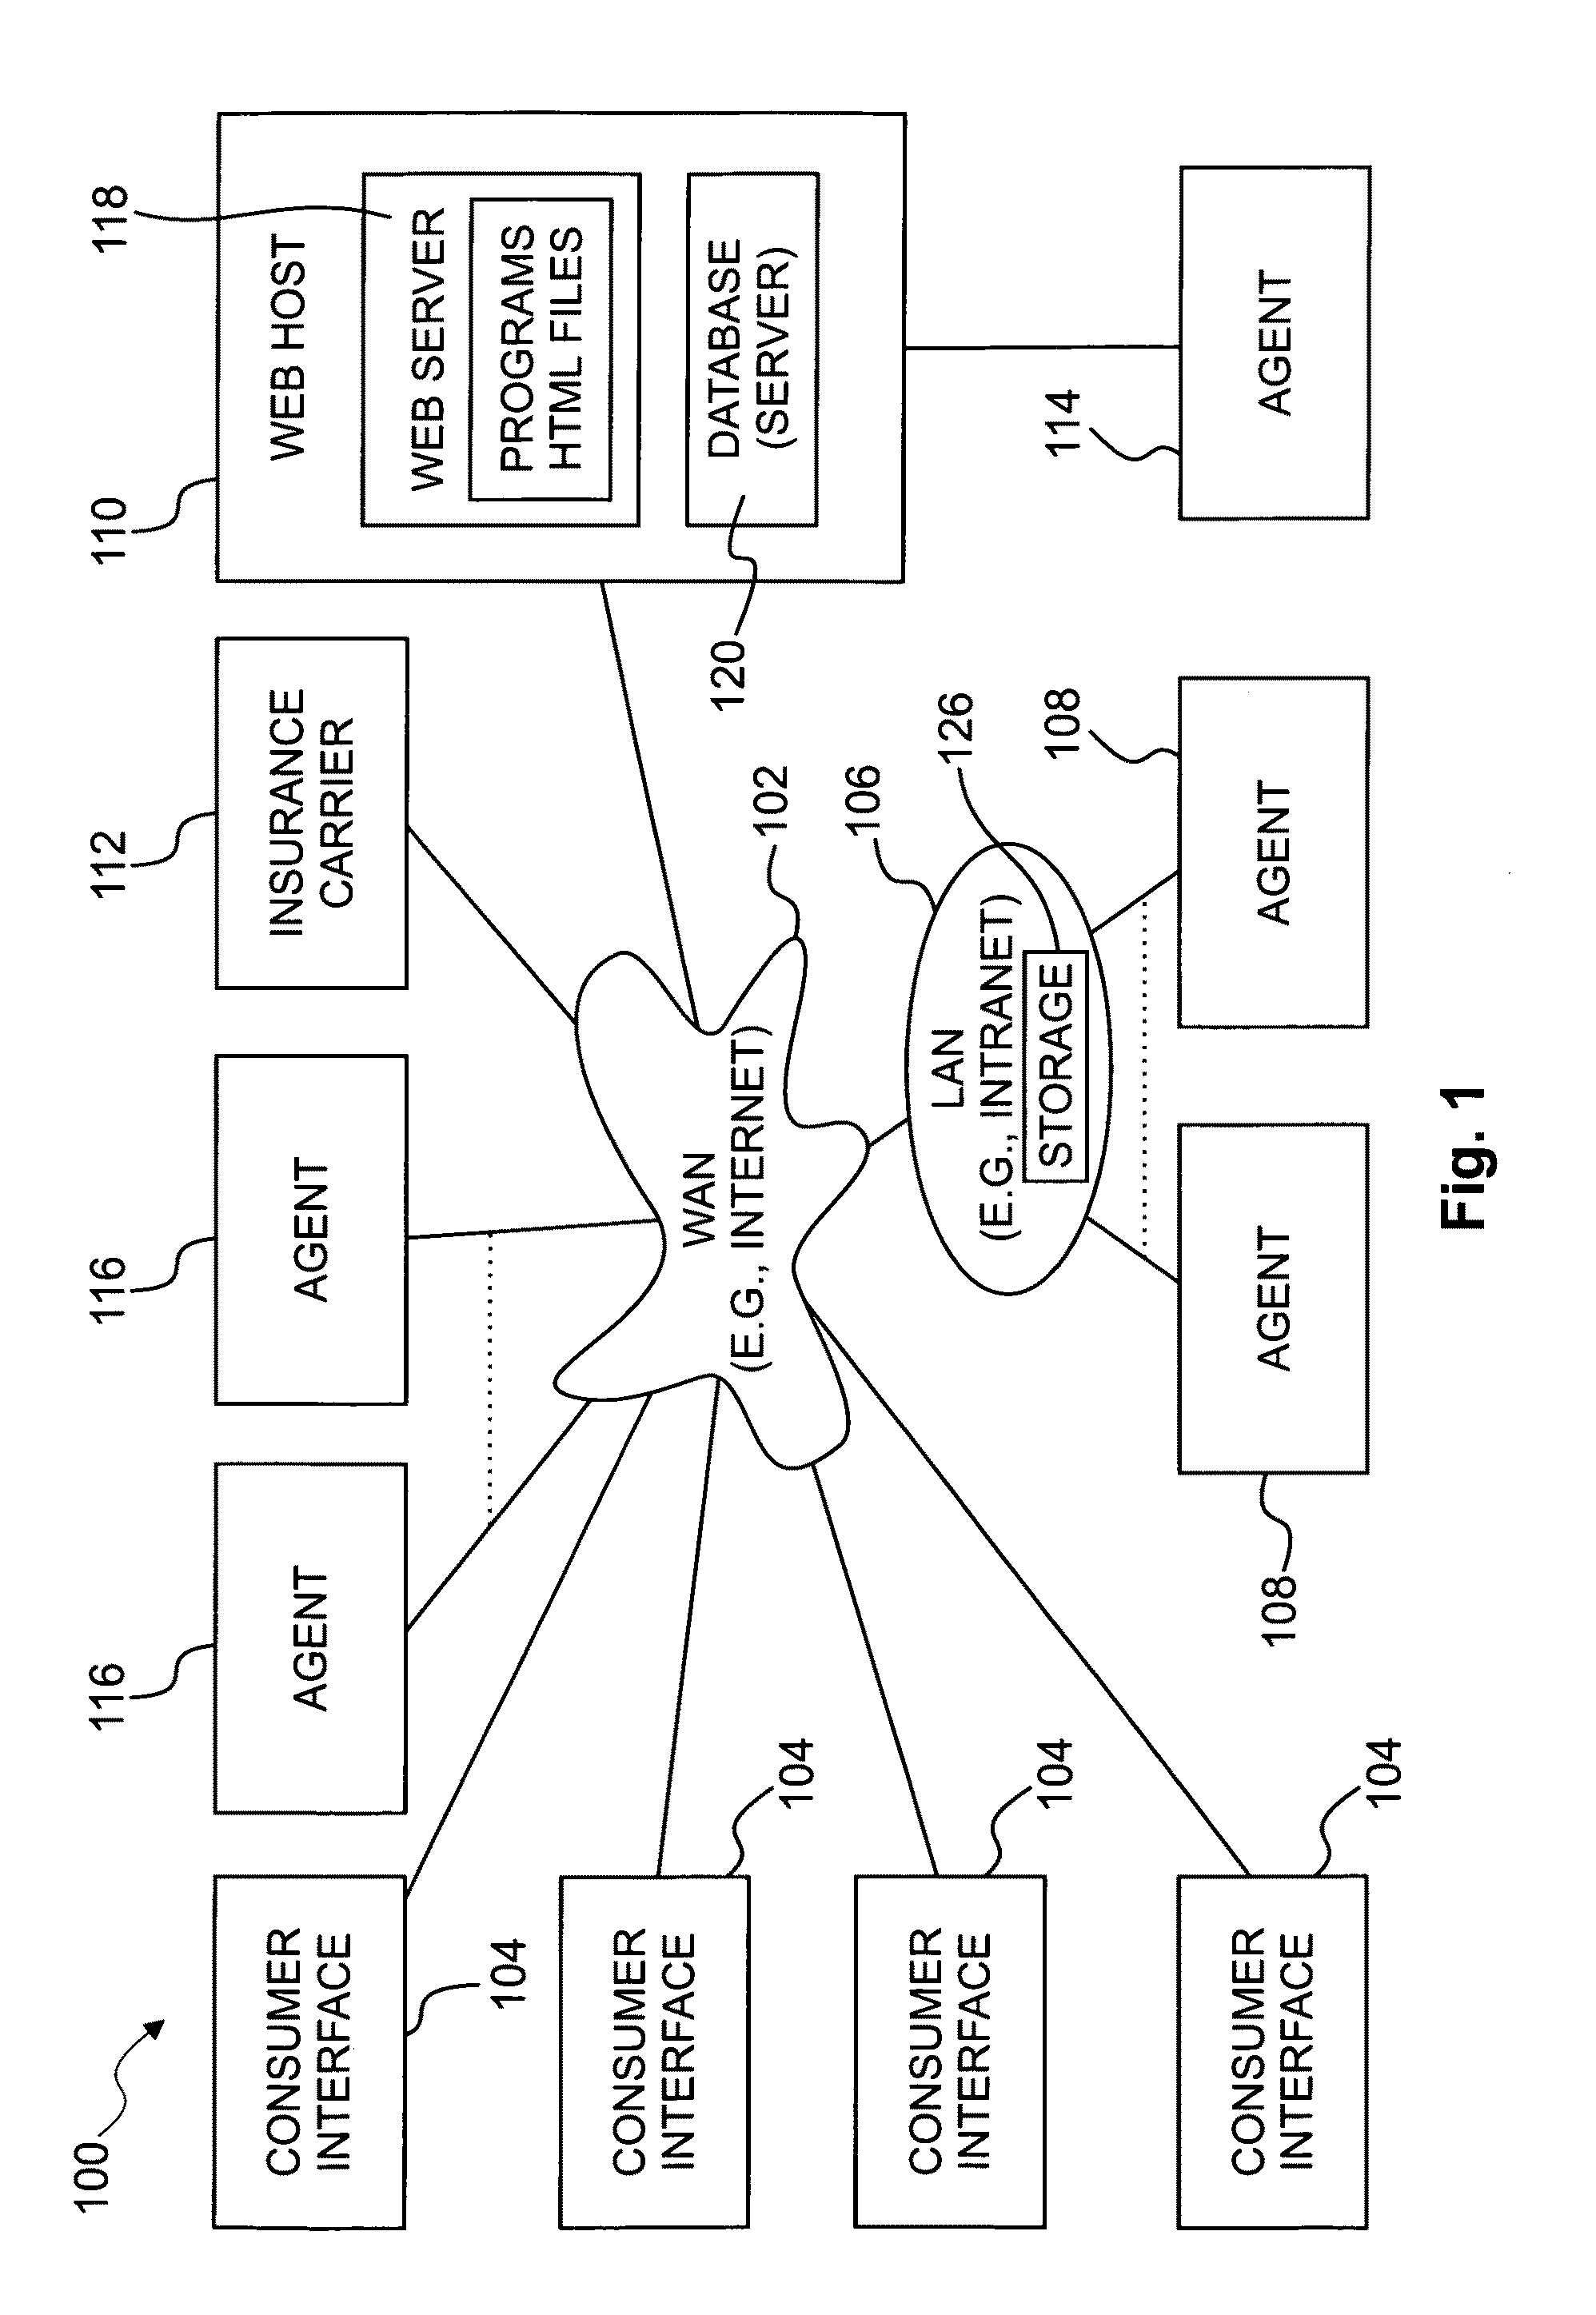 Interactive systems and methods for insurance-related activities